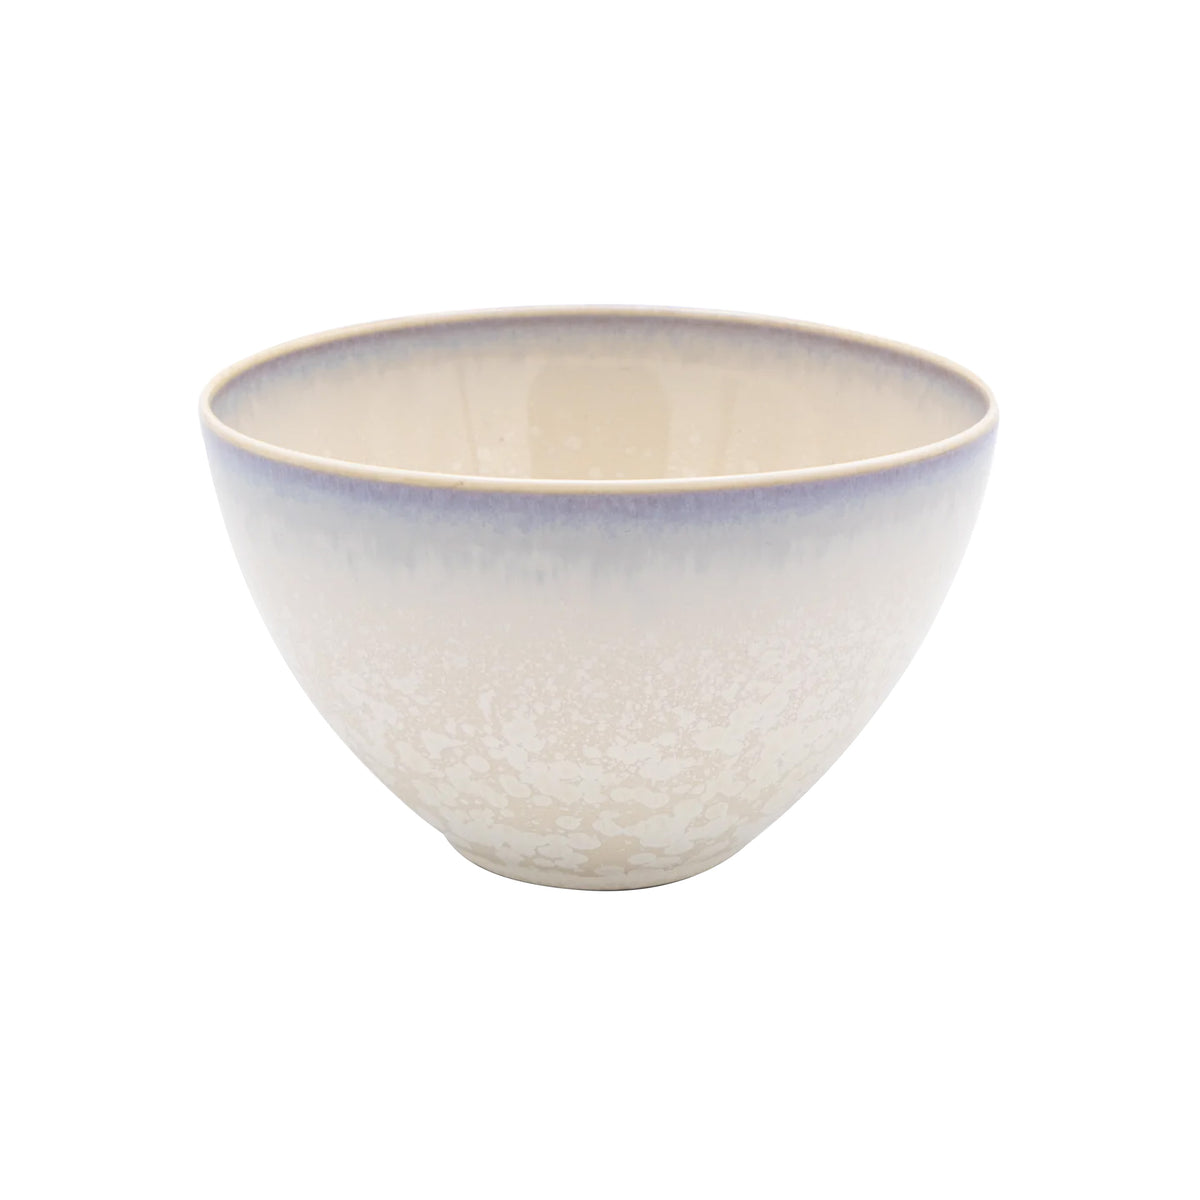 SONG Perle - Bowl, extra